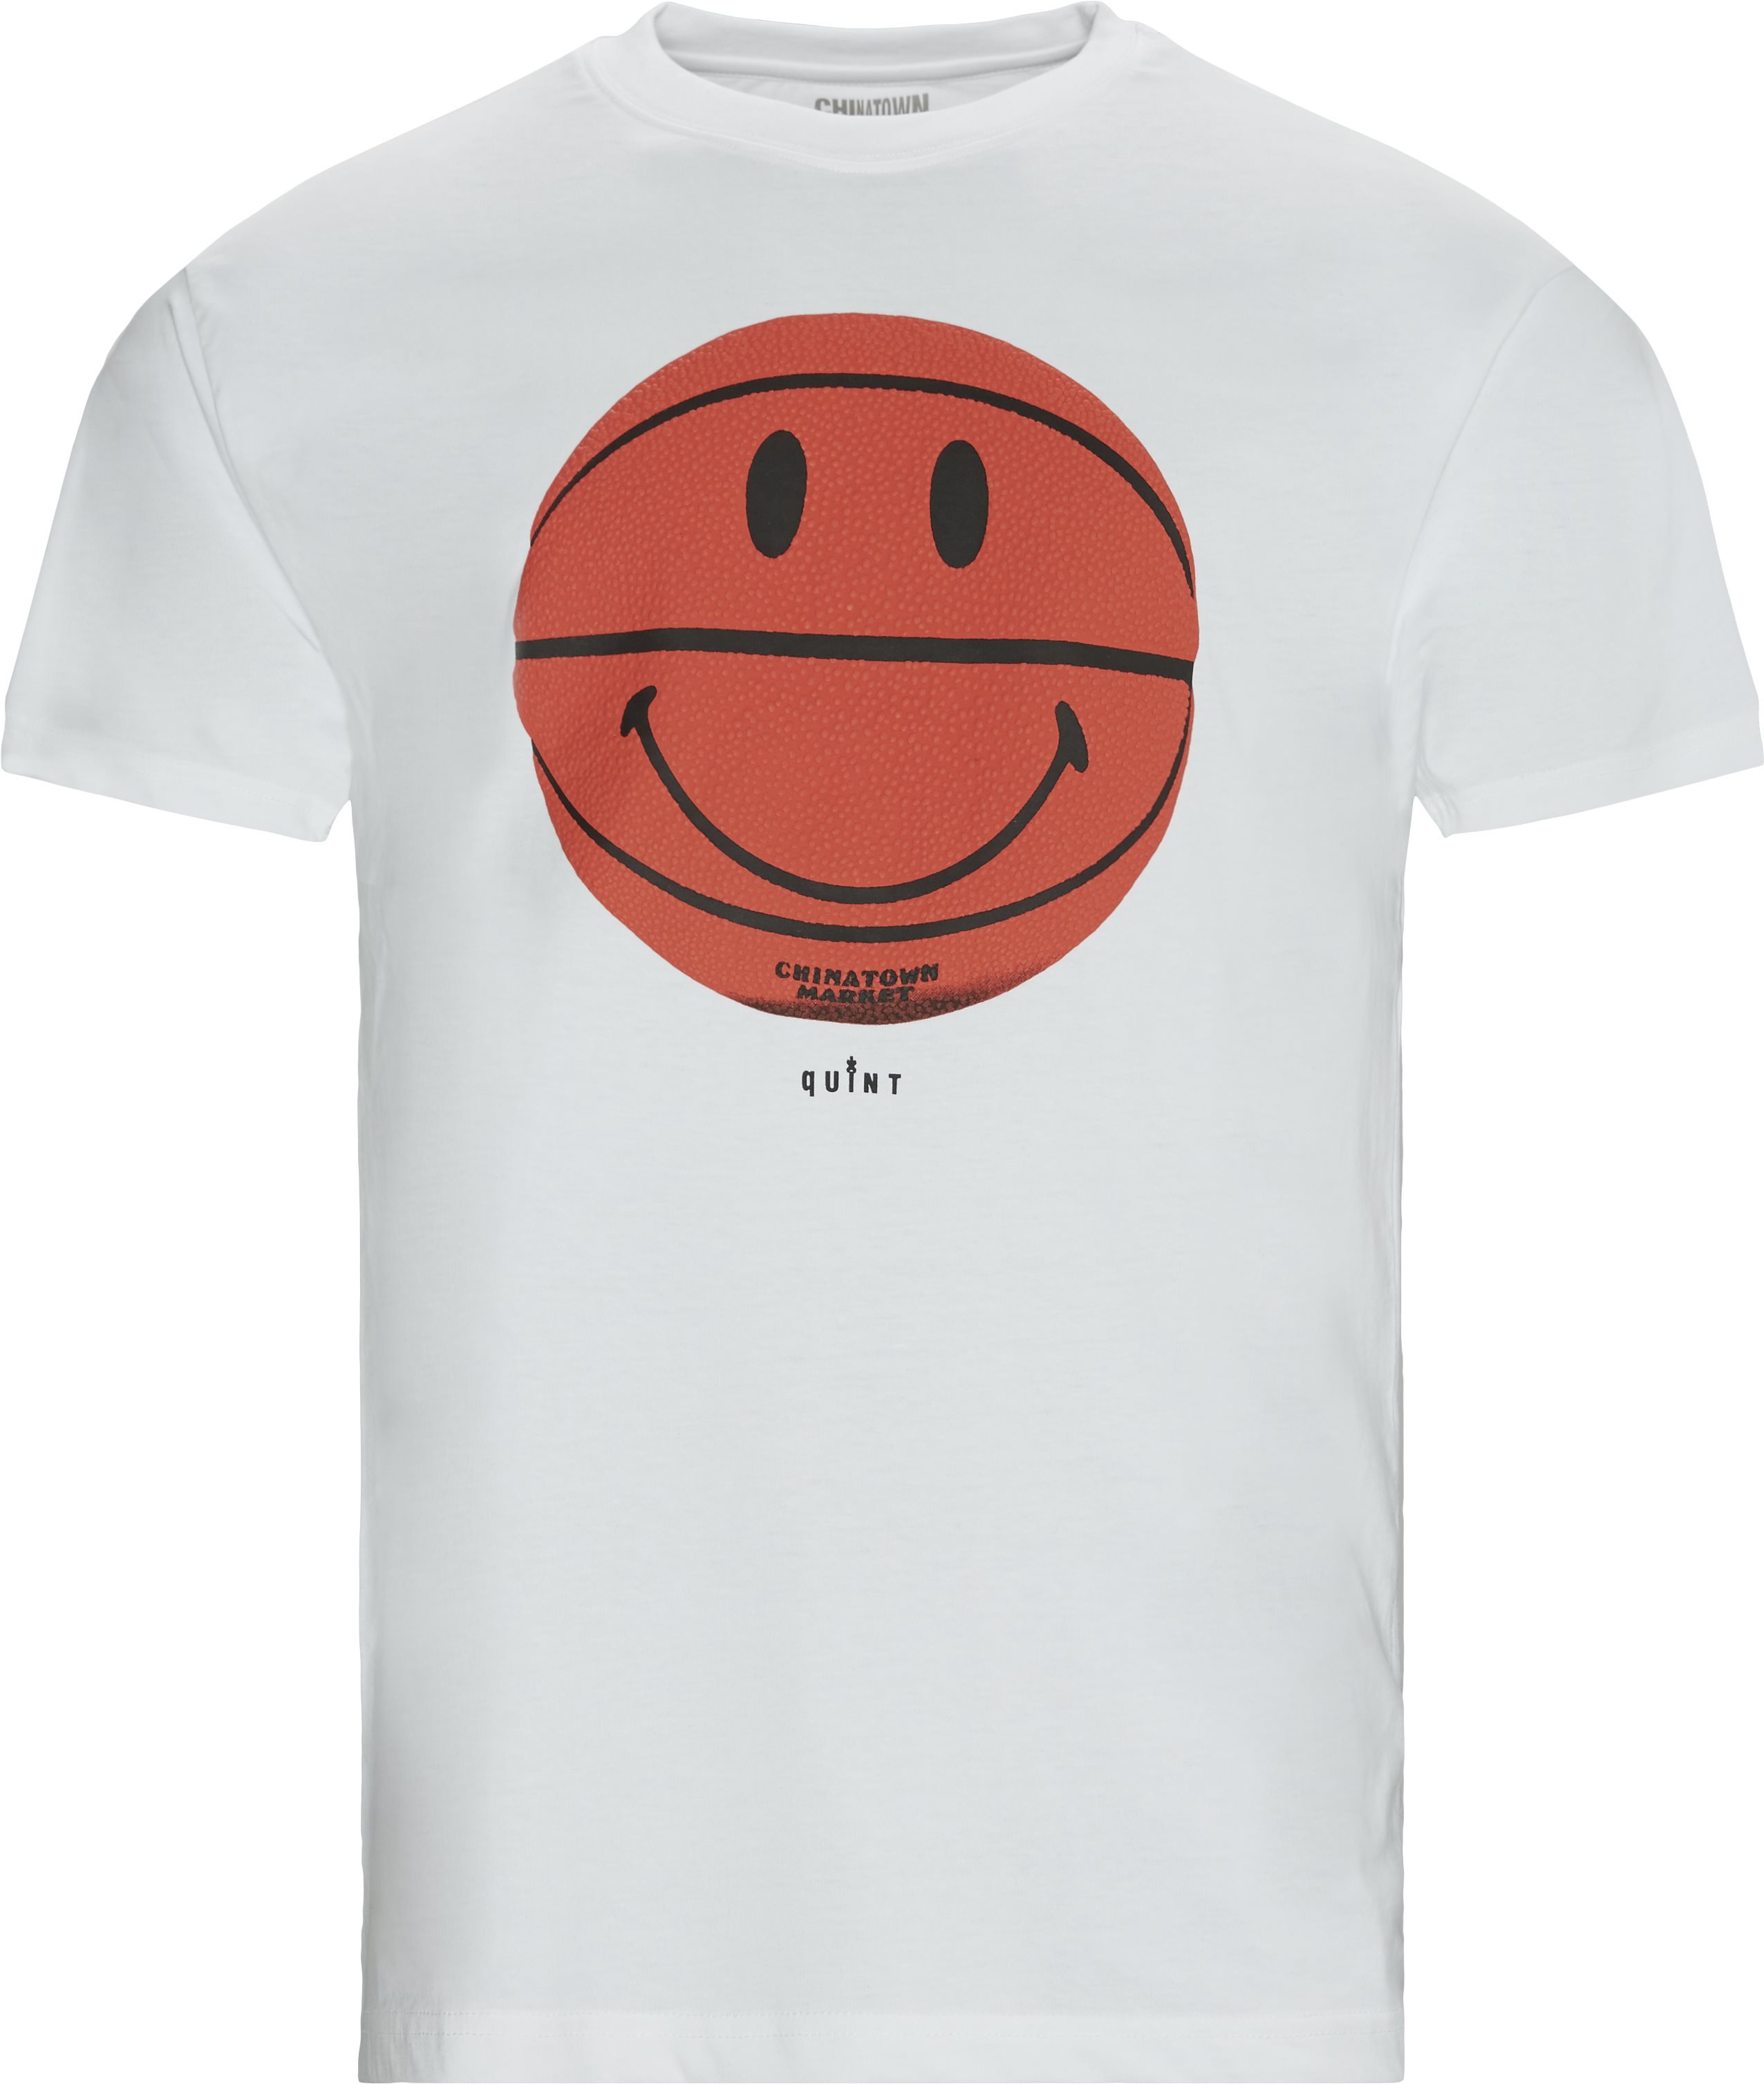 Smiley CTM X QUINT BBall Tee - T-shirts - Regular fit - Hvid